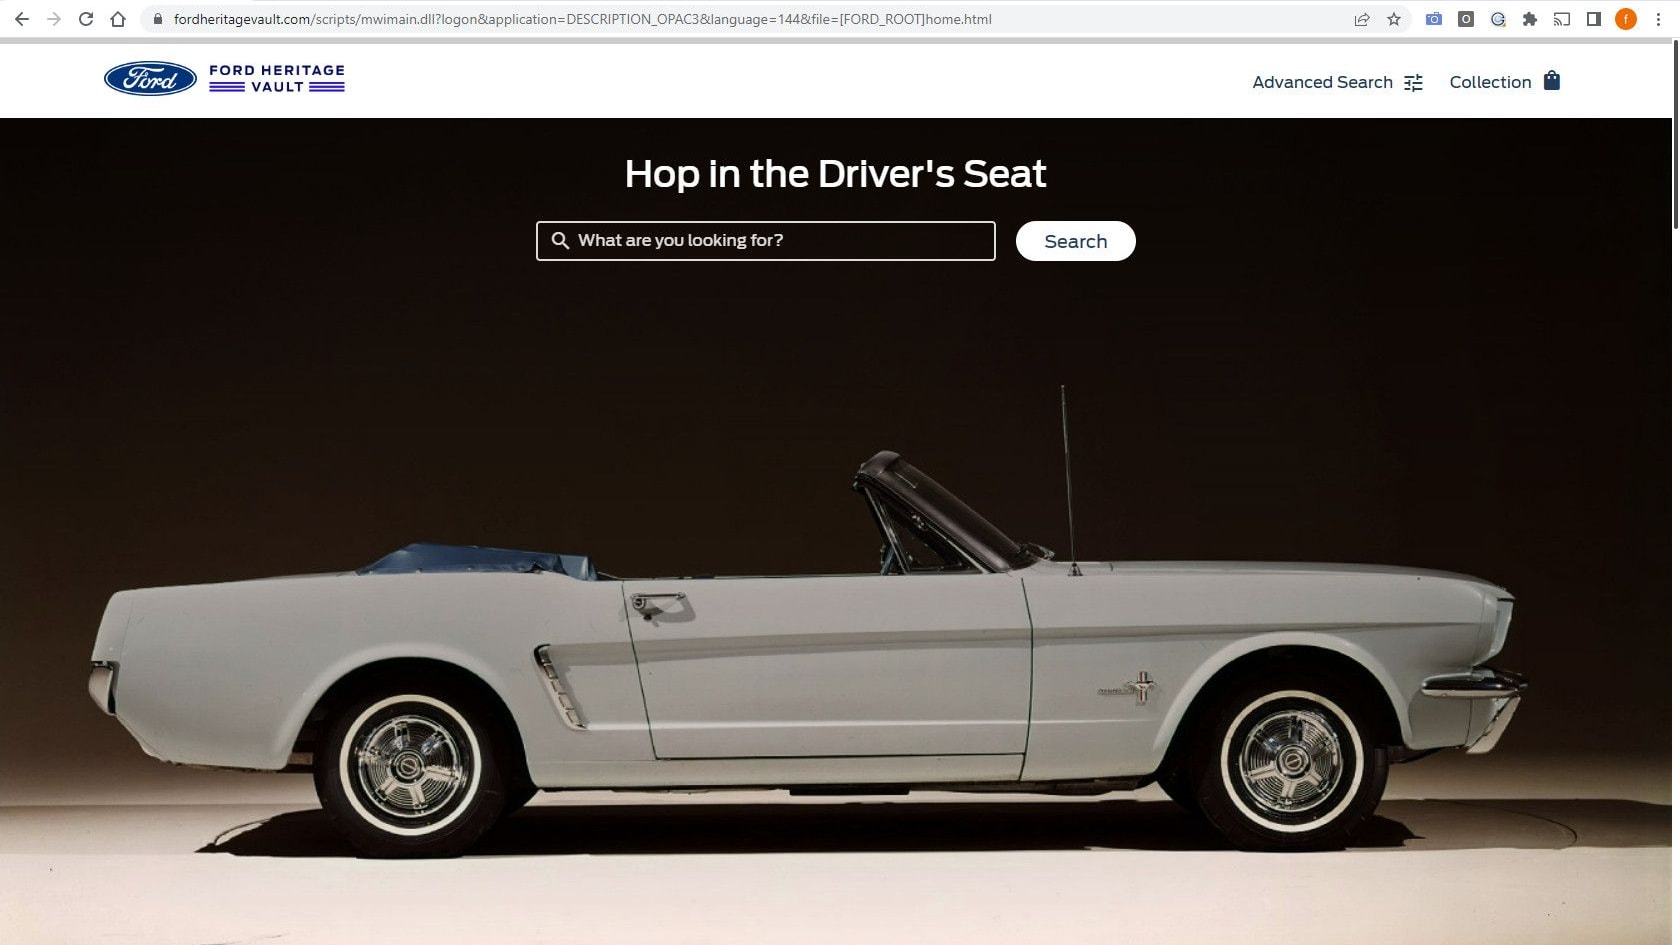 Ford Heritage Vault Home Page Search Screen